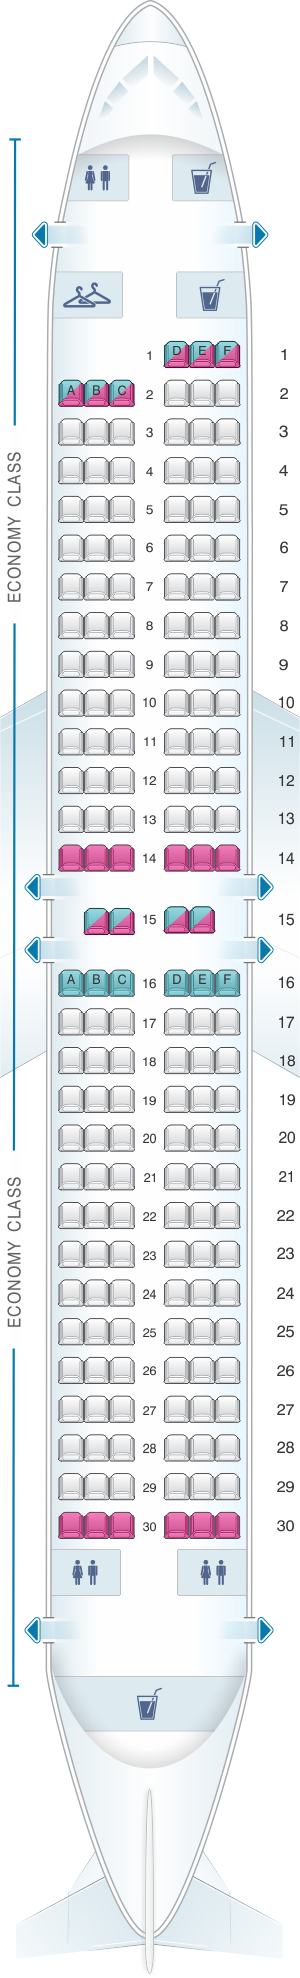 Seat map for Southwest Airlines Boeing B737 MAX 8